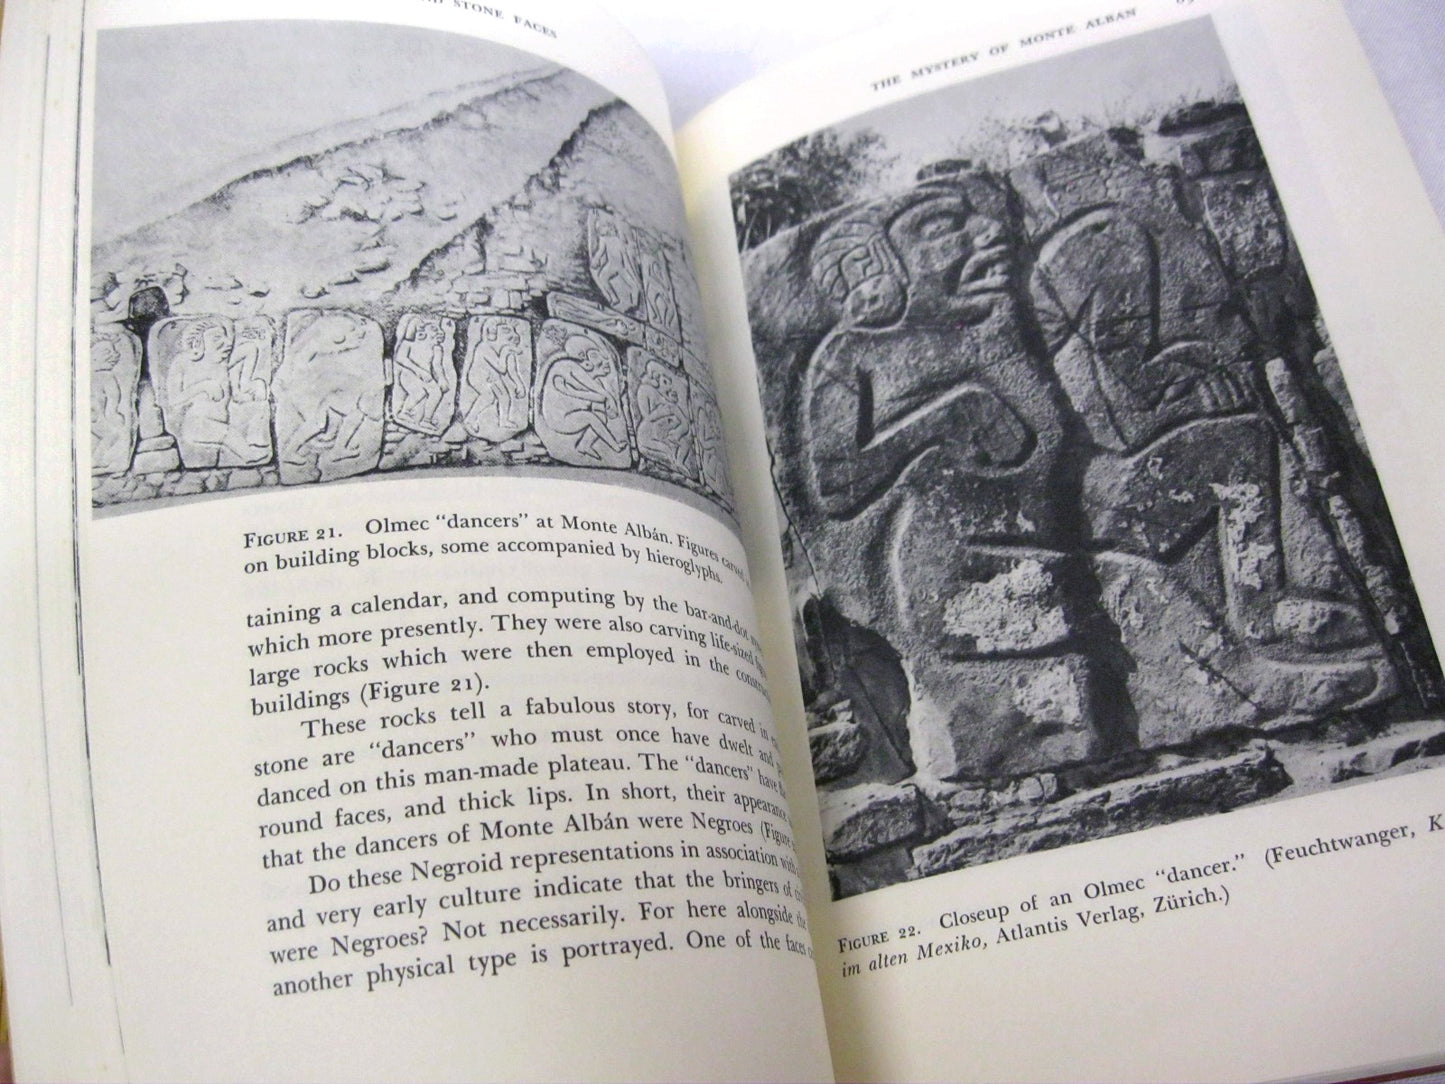 Fair Gods and Stone Faces by Constance Irwin